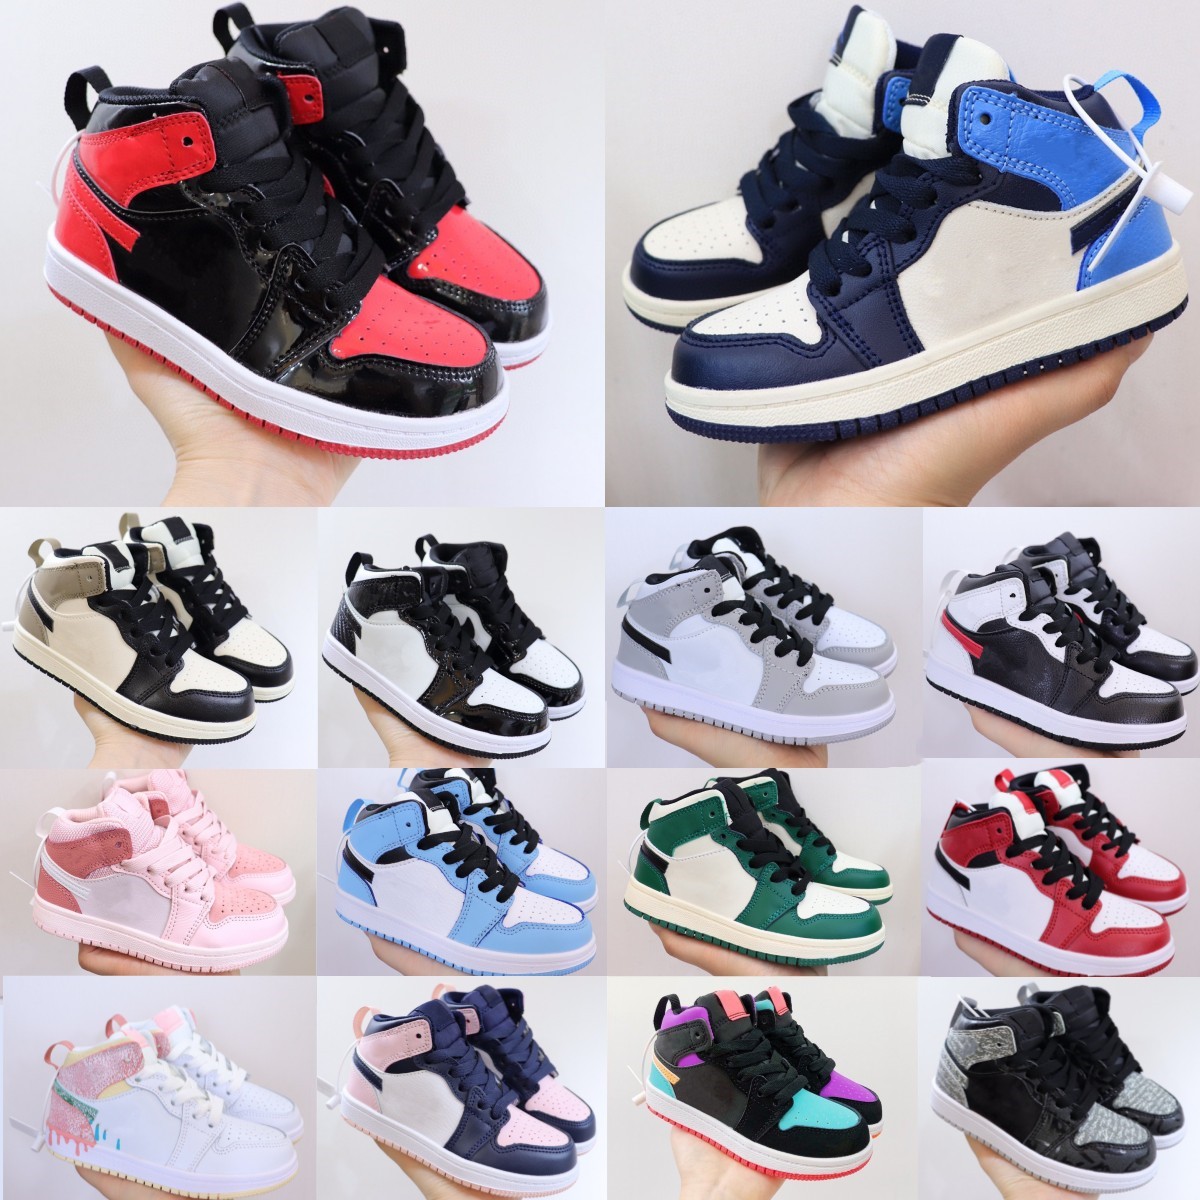 

kids shoes 1s black 1 shoe boys high sneakers designer basketball blue trainers baby kid youth toddler infants children girls outdoor sport sneaker First Walkers